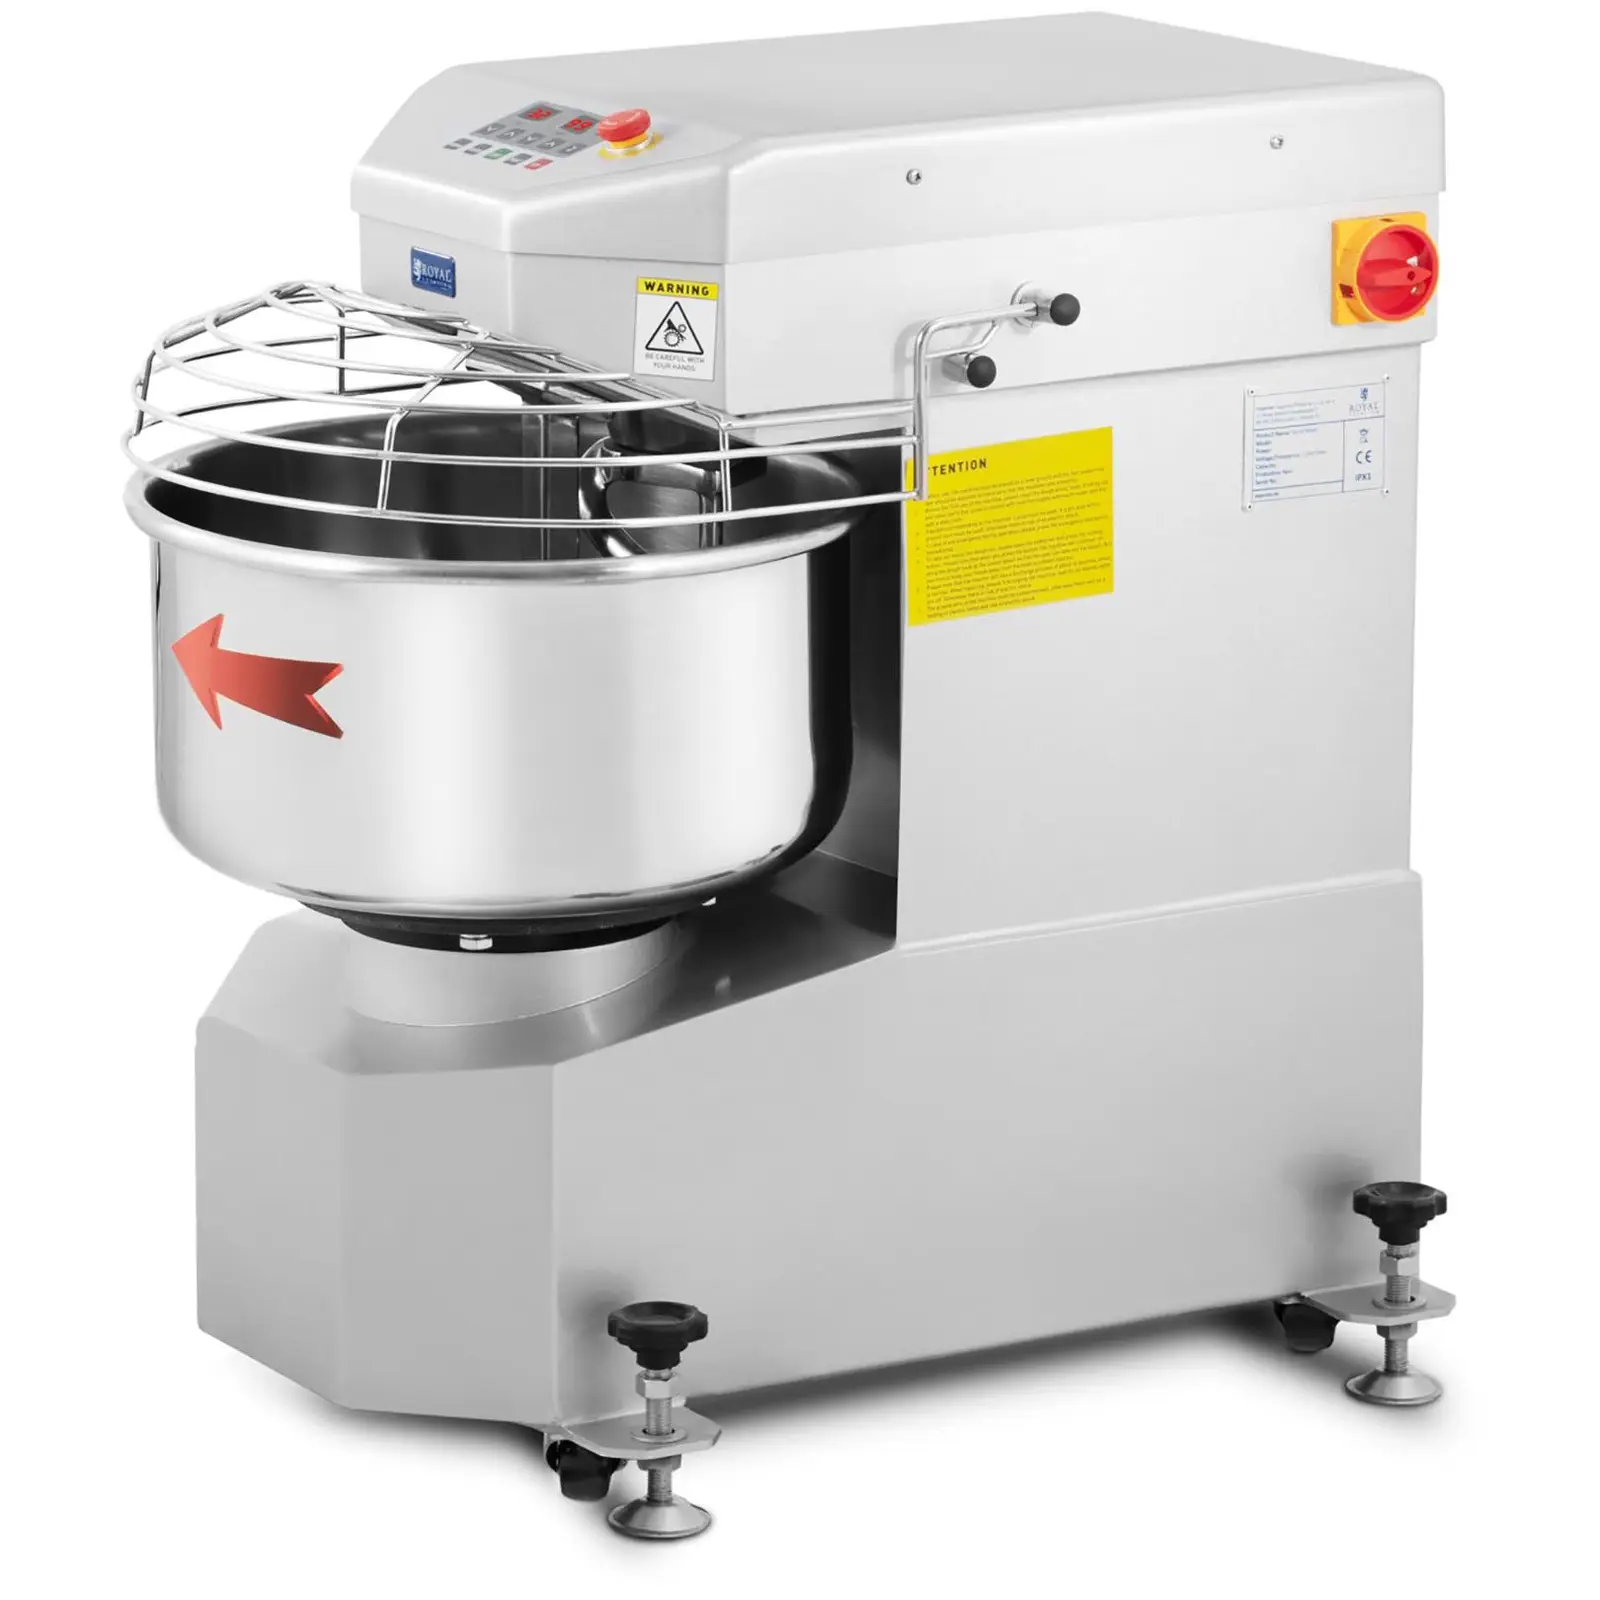 Kneading Machine - 23 L - Royal Catering - 1300 W